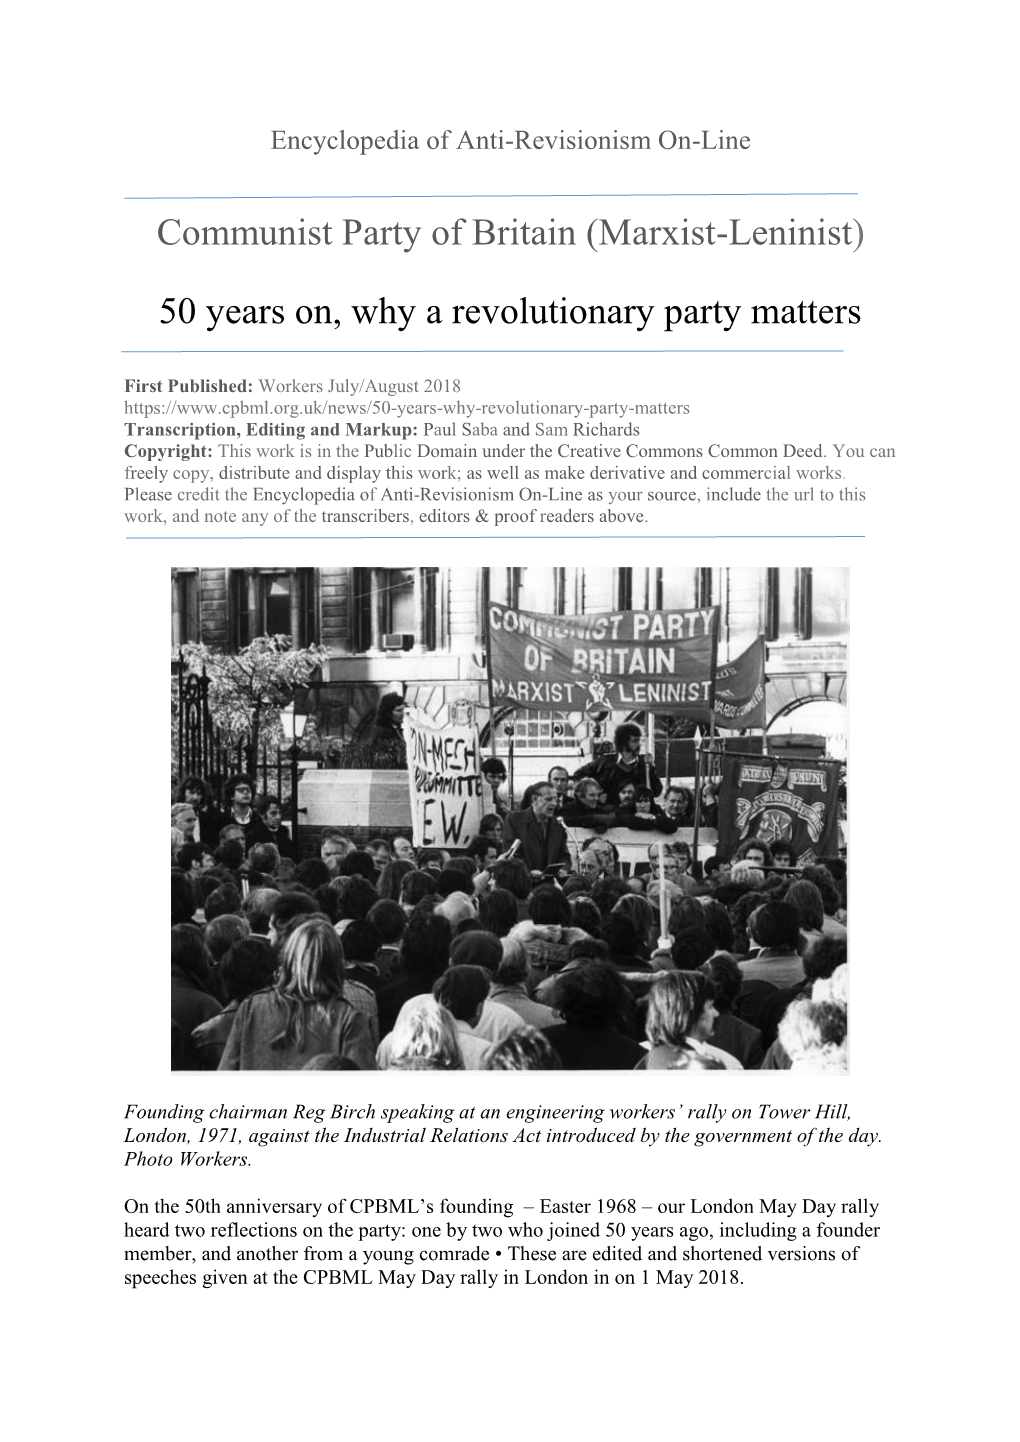 Communist Party of Britain (Marxist-Leninist) 50 Years On, Why